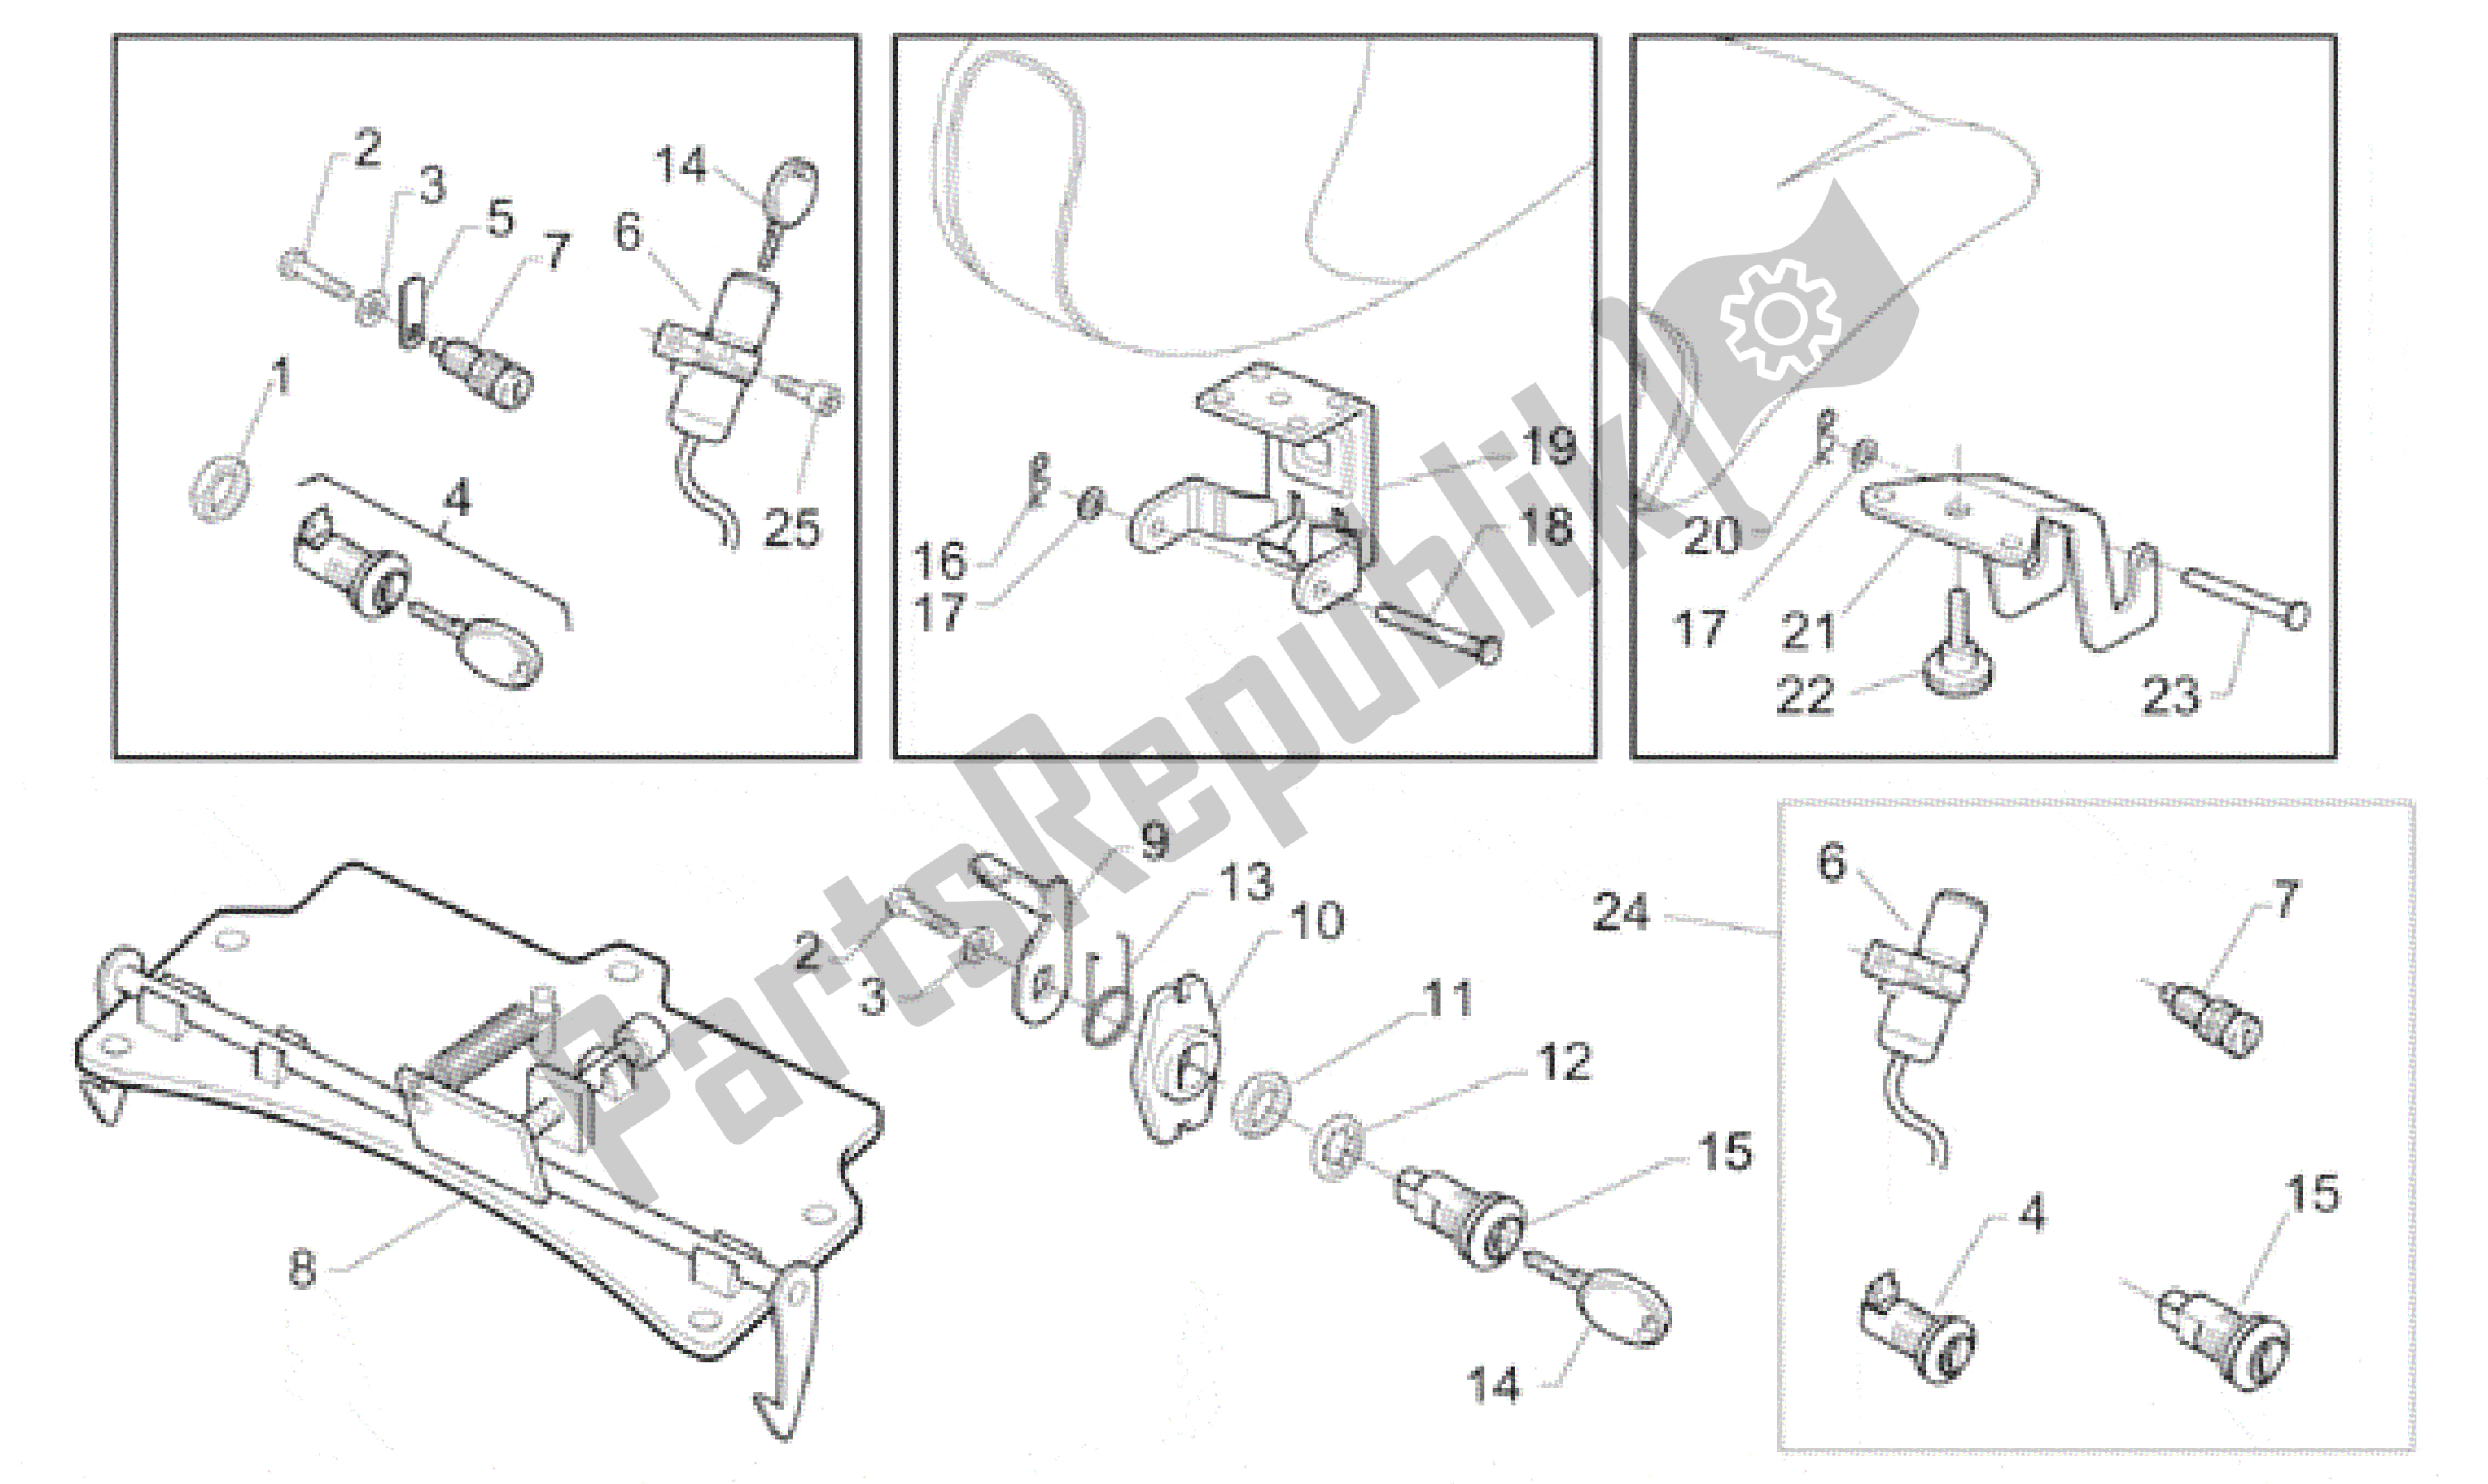 All parts for the Lock Hardware Kit of the Aprilia Gulliver 50 1996 - 1998